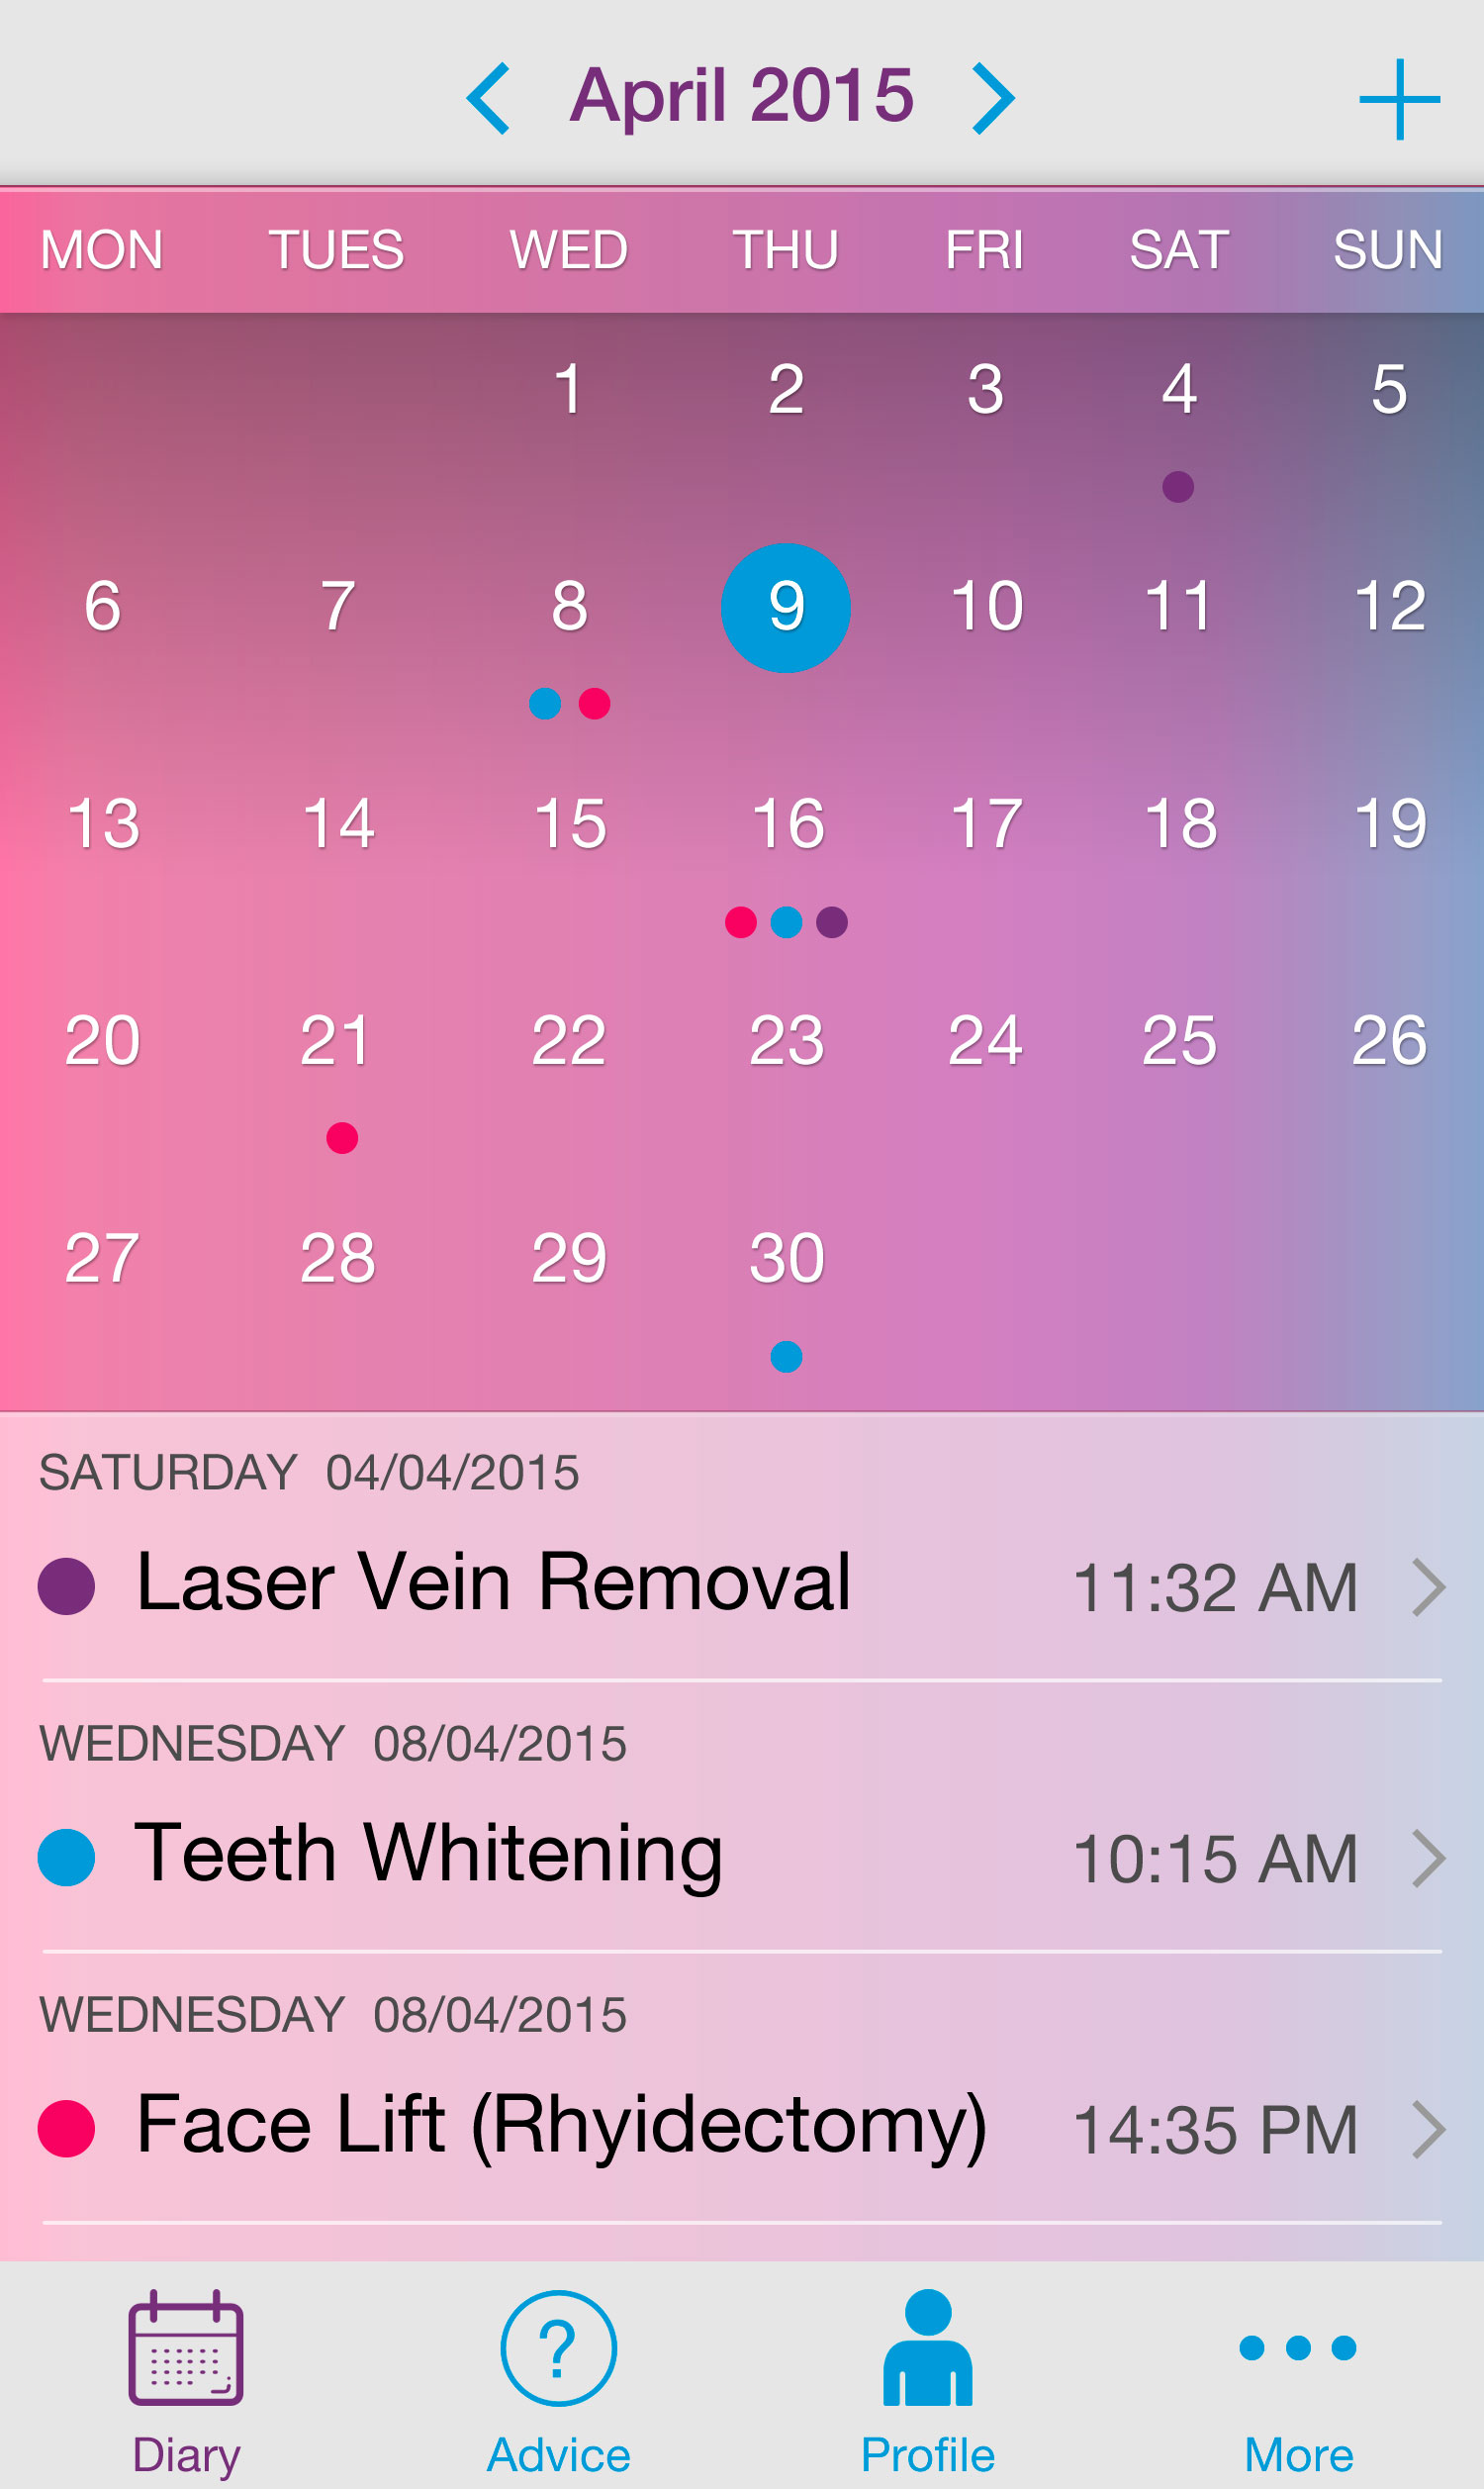 Users can schedule and keep track of procedures